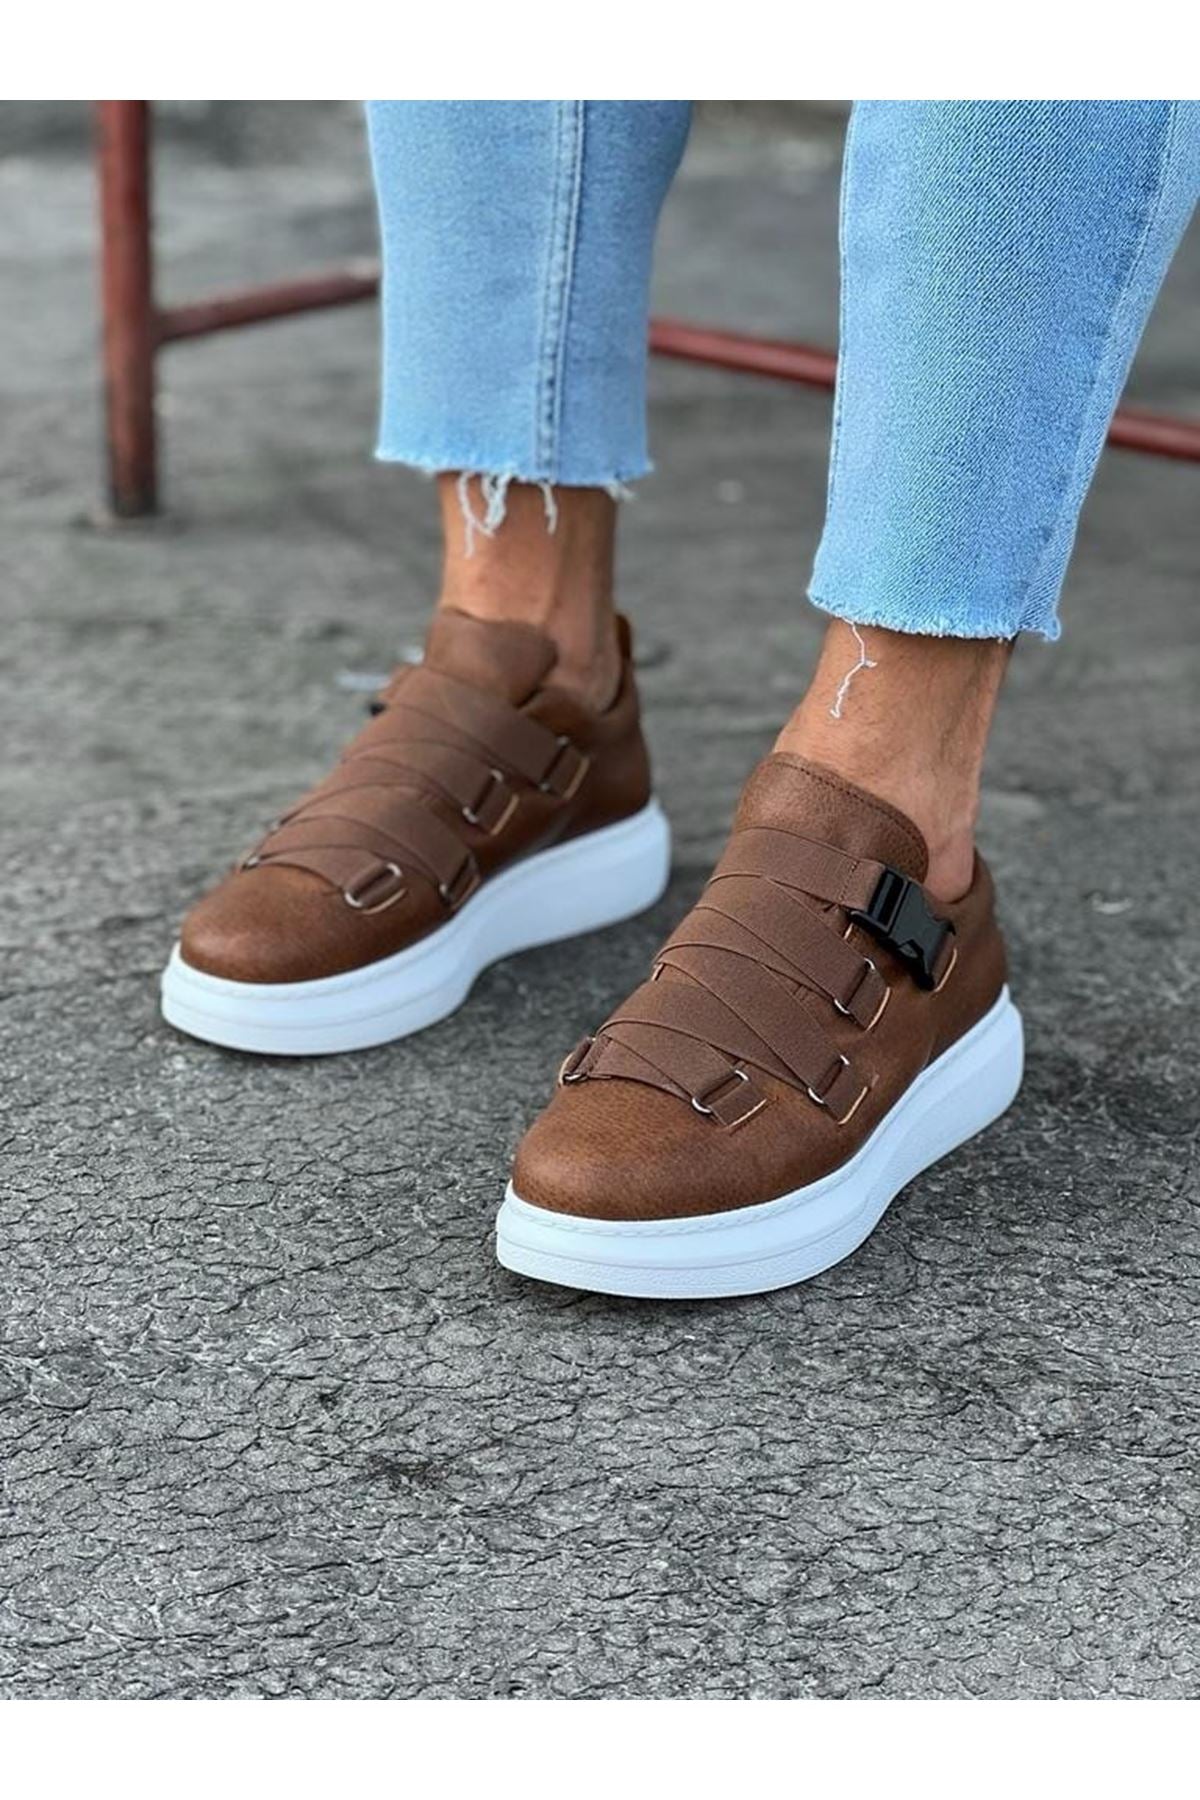 WG033 Tobacco Men's High-Sole Shoes sneakers - STREETMODE™